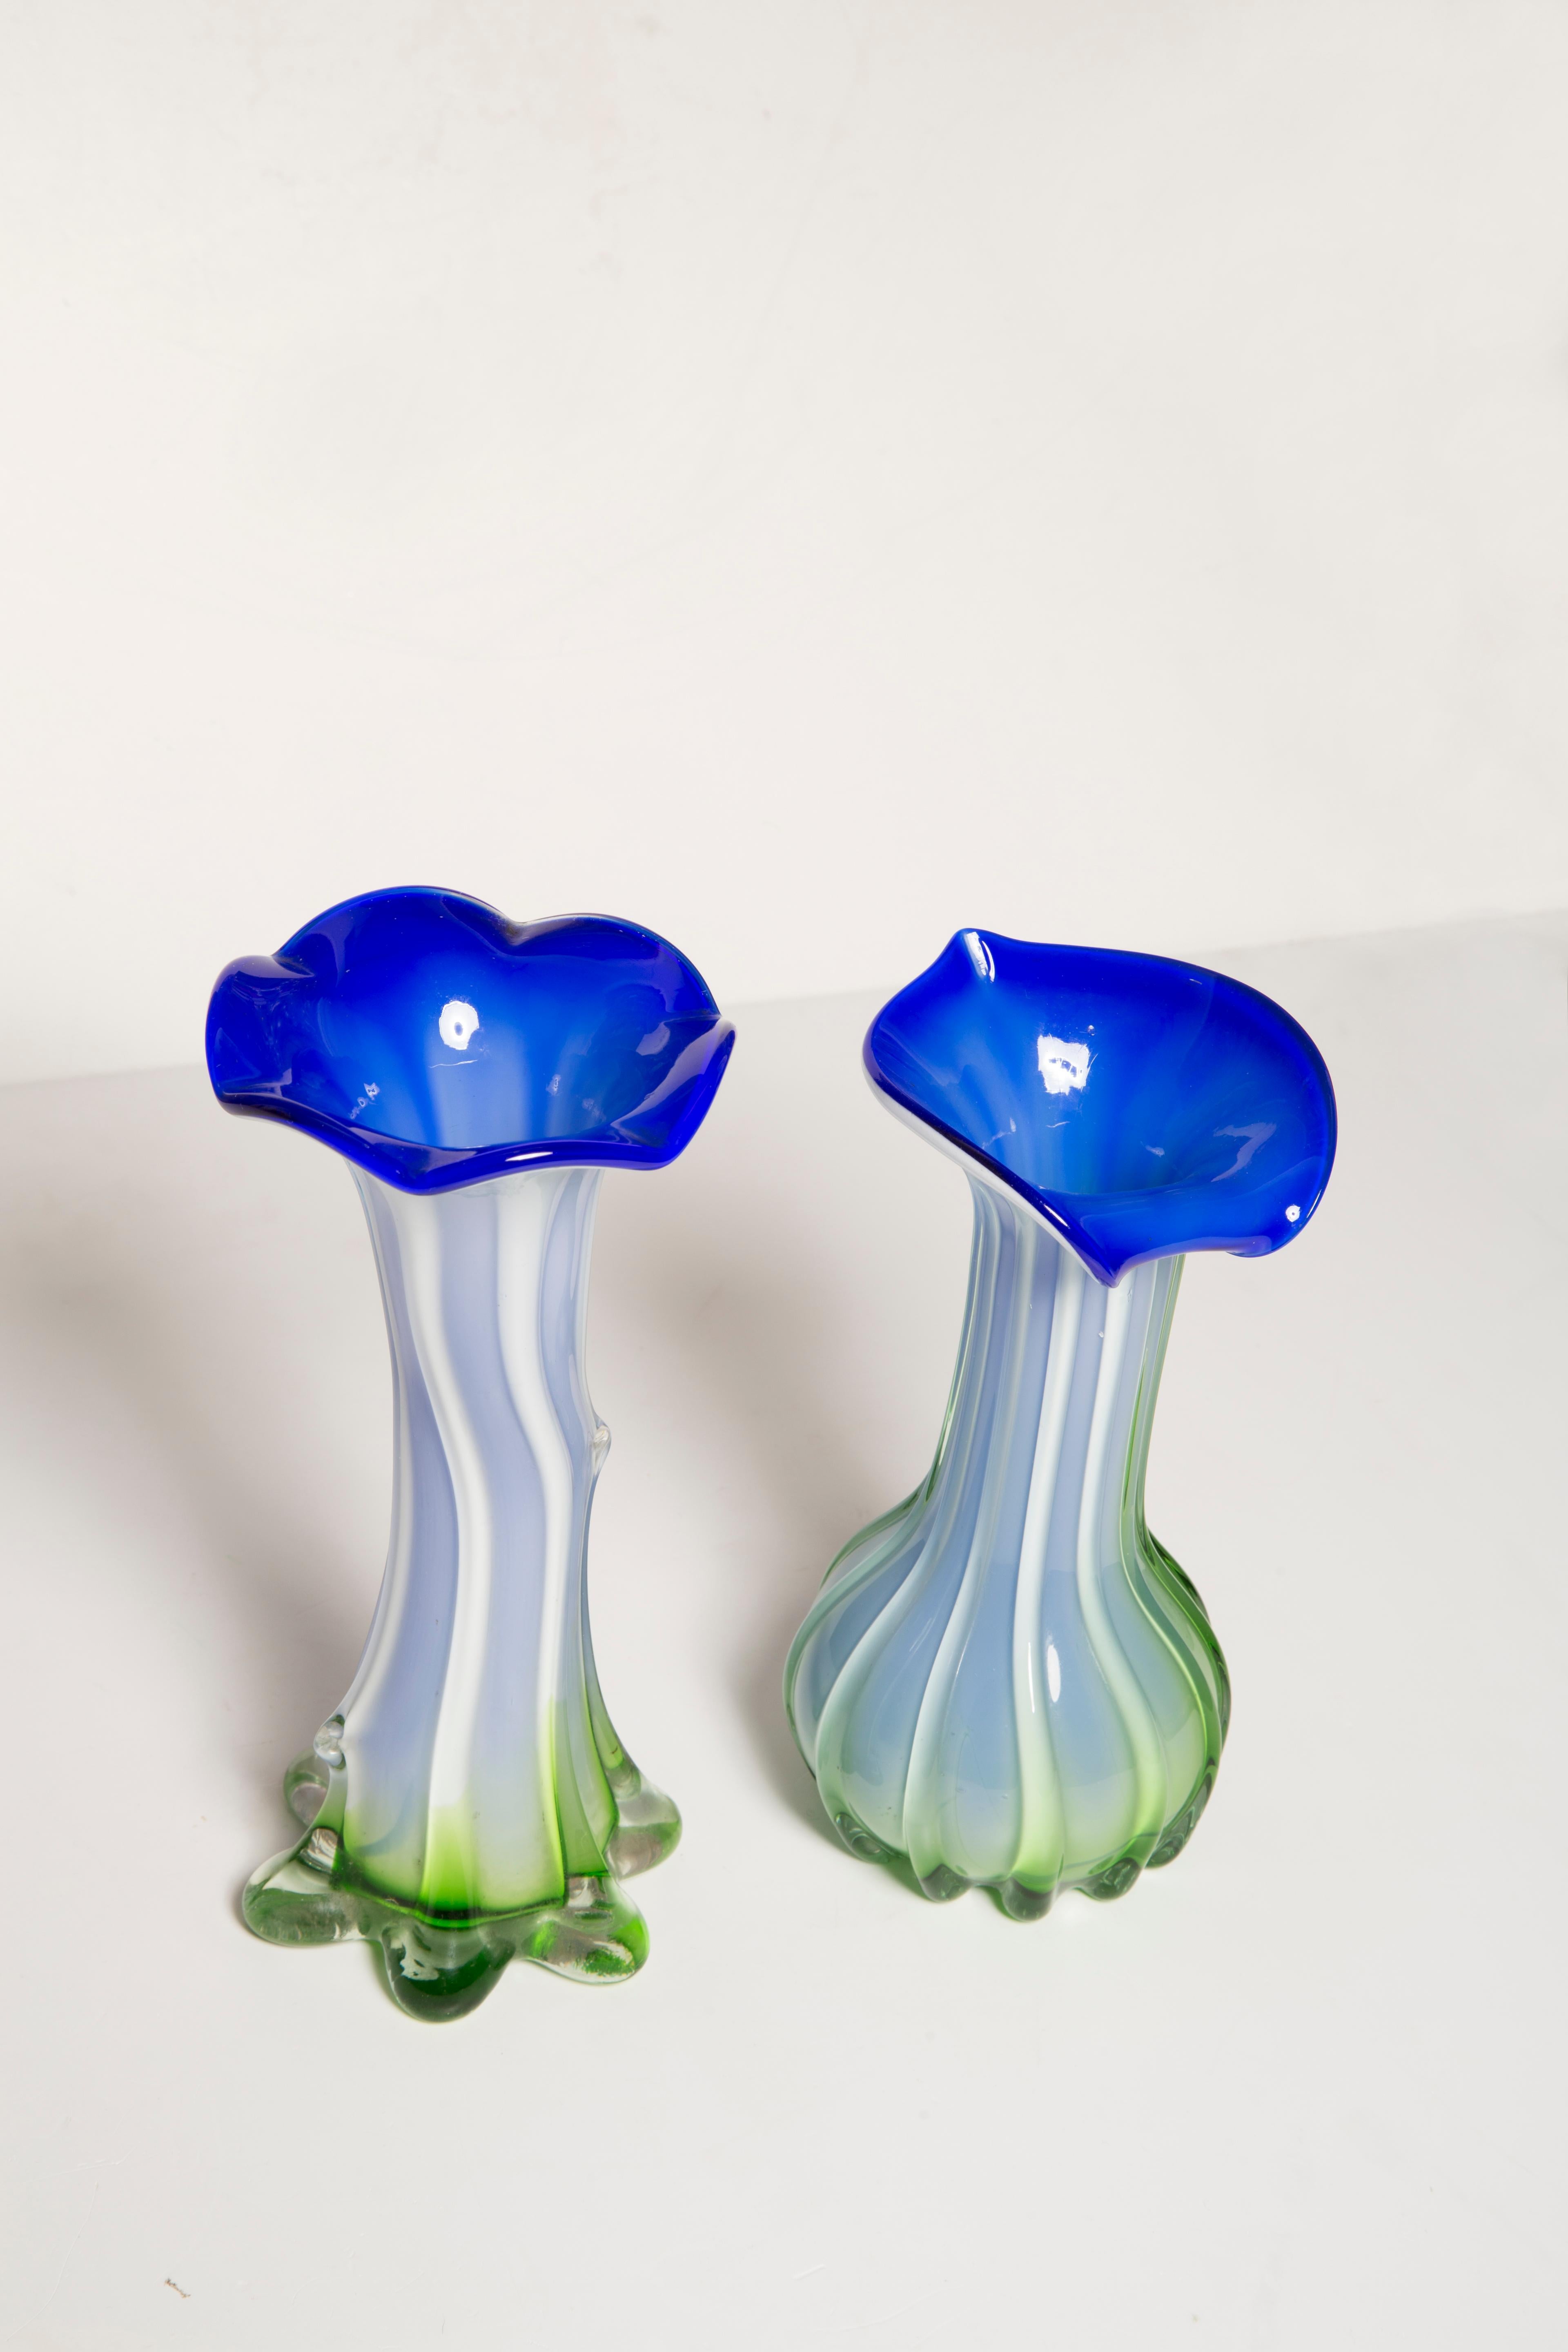 Set of Two Midcentury Vintage Green and Blue Murano Vases, Italy, 1960s For Sale 1